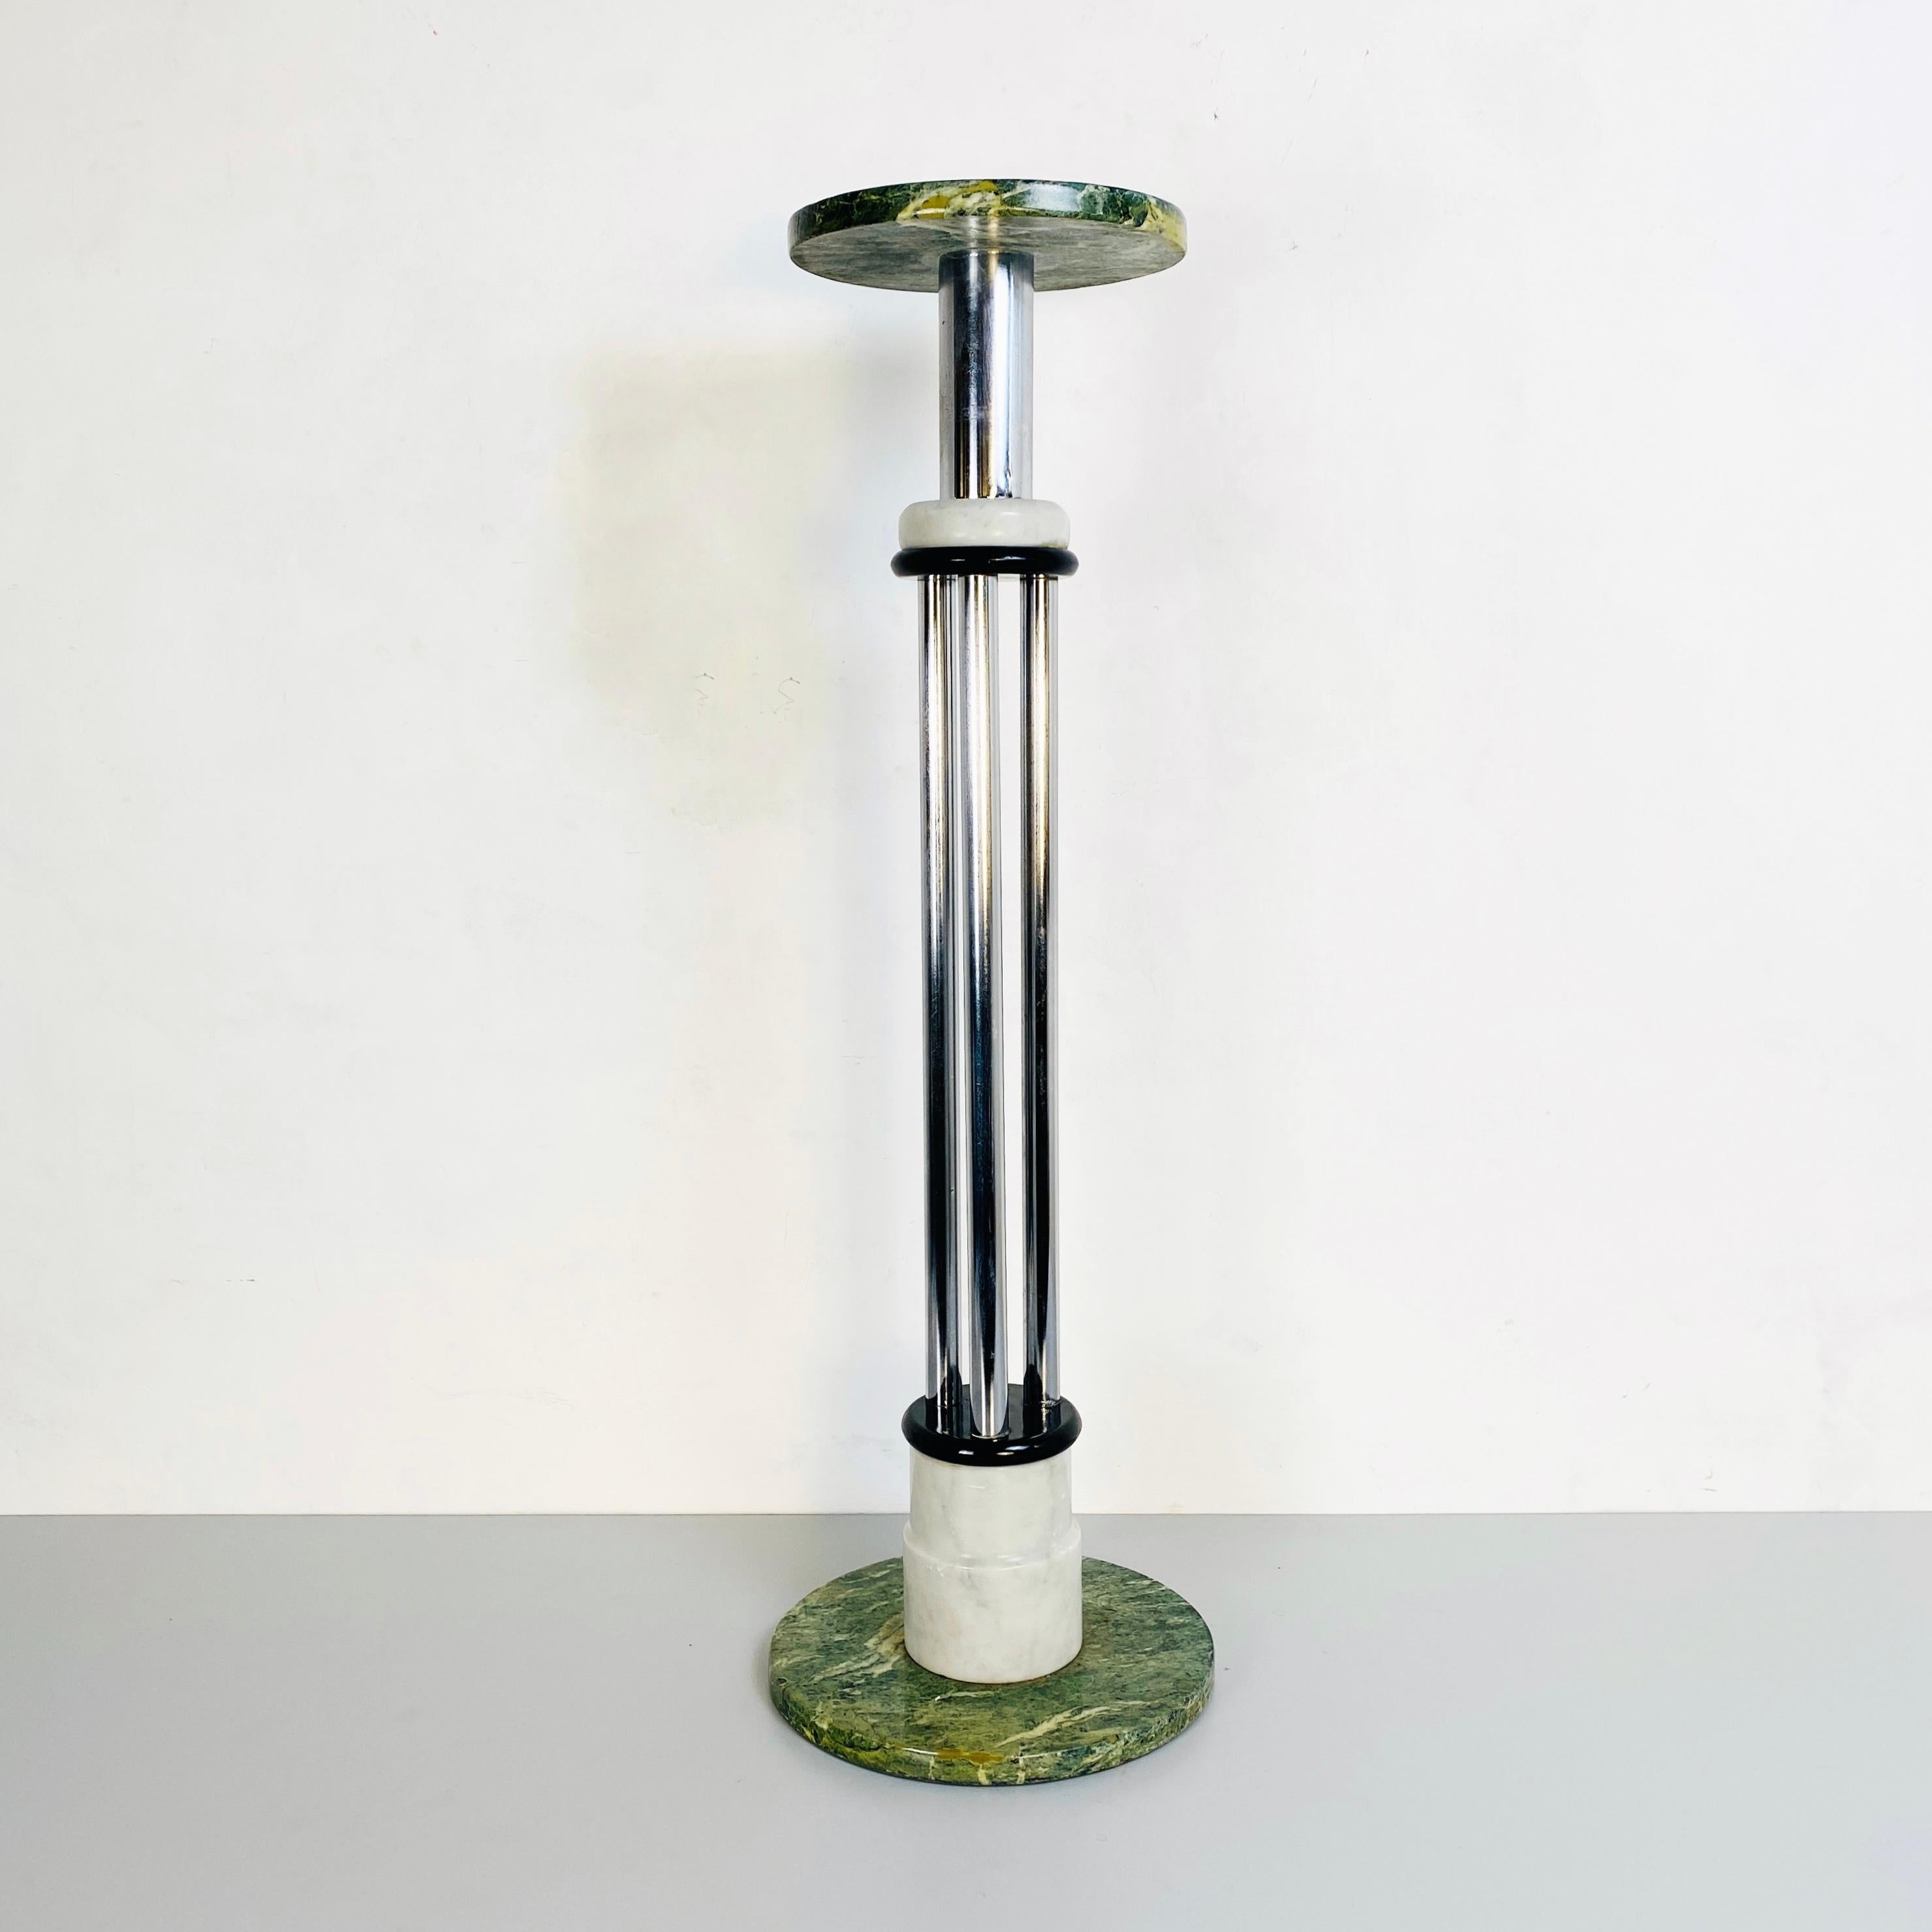 Italian Mid-Century Modern cylindrical pedestal with marble, 1980s
Cylindrical pedestal composed of a chromed steel structure alternating with green, white and black marble tops, 1980s.

Very good condition.

Measures in cm 35 x 95 H.